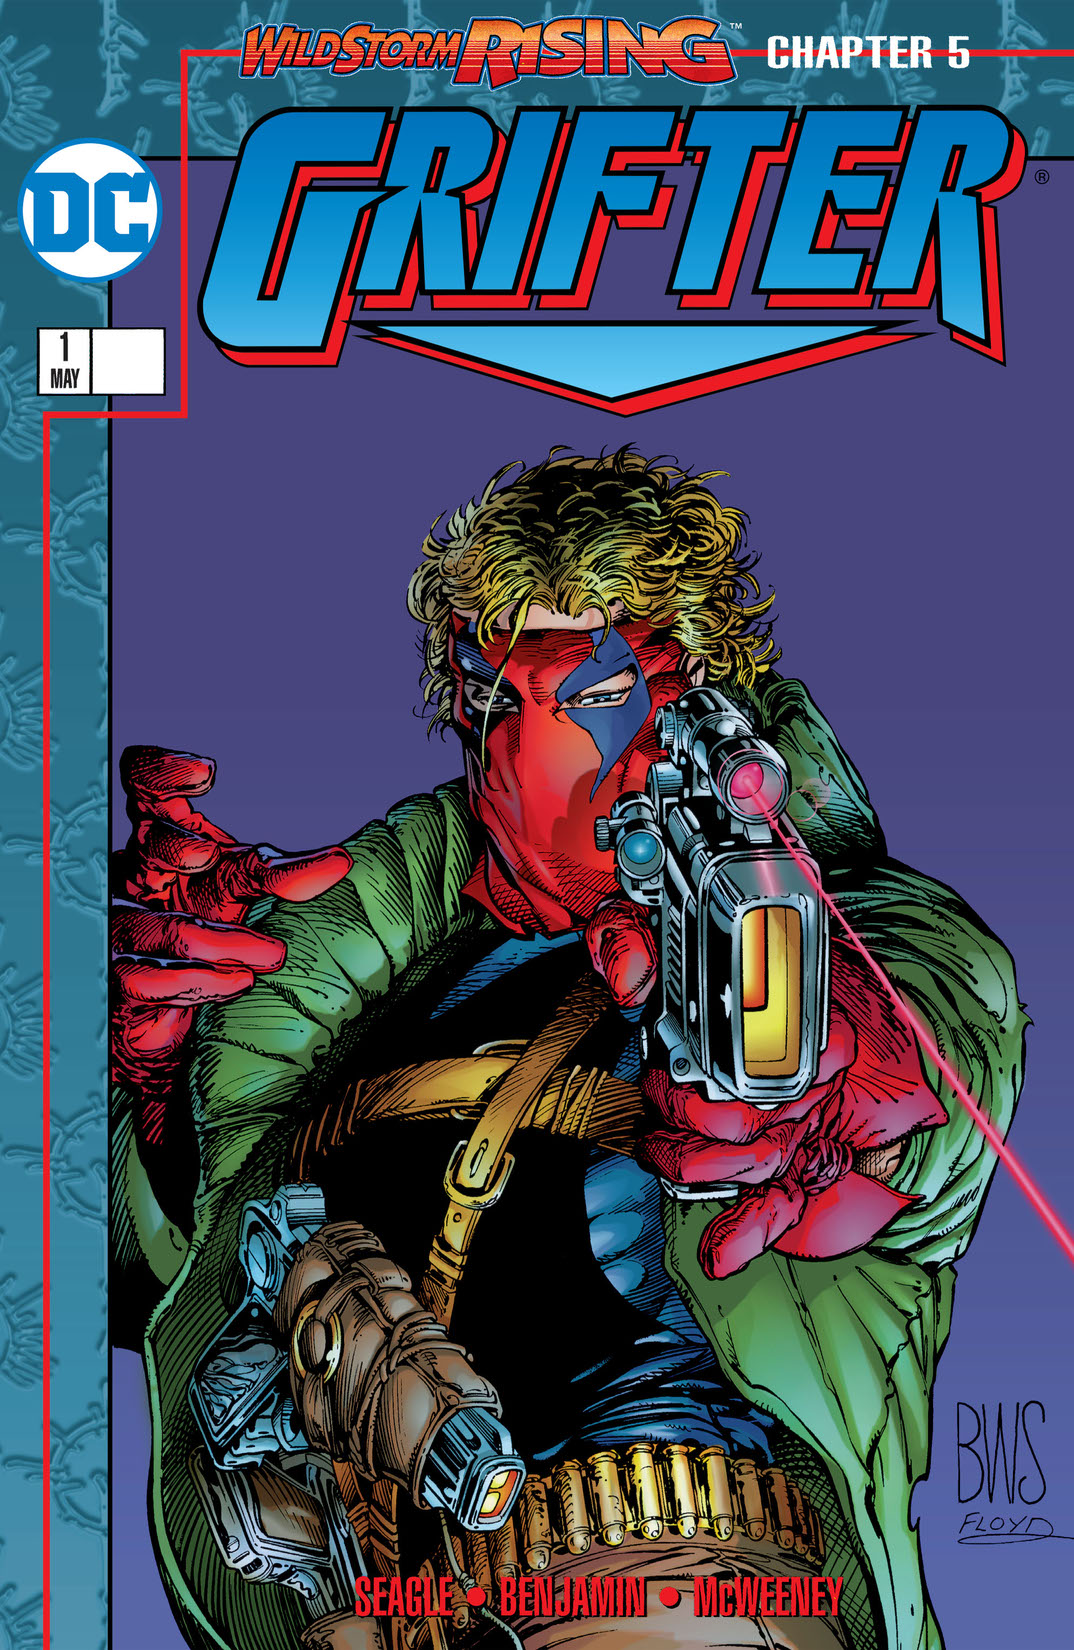 Grifter (1995-1996) #1 preview images